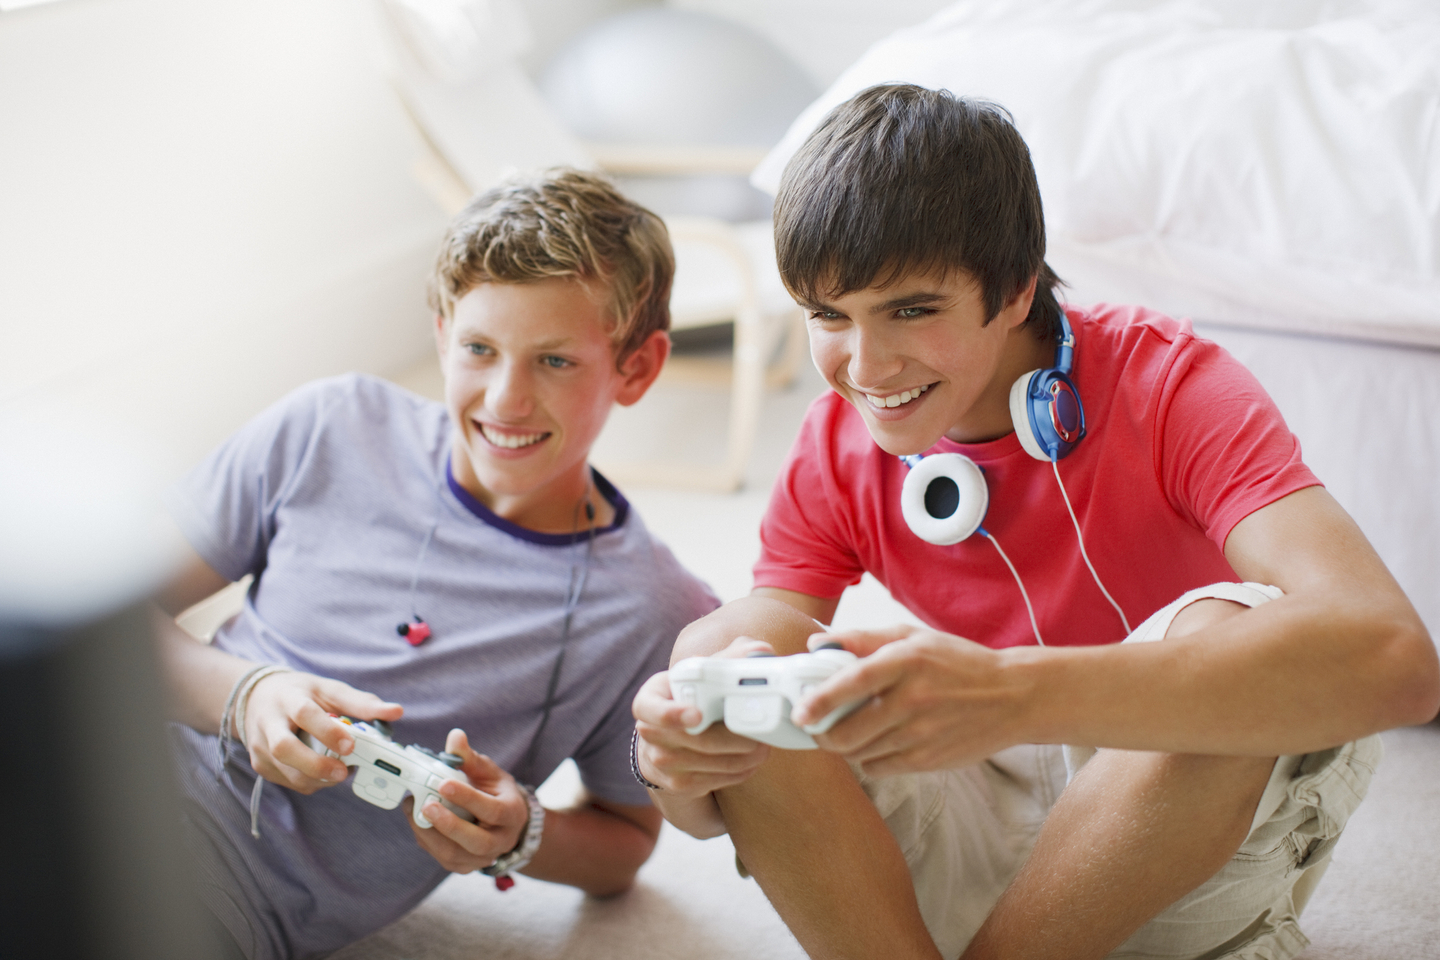 Are Video Games Good for Kids? Here's What the Research Says